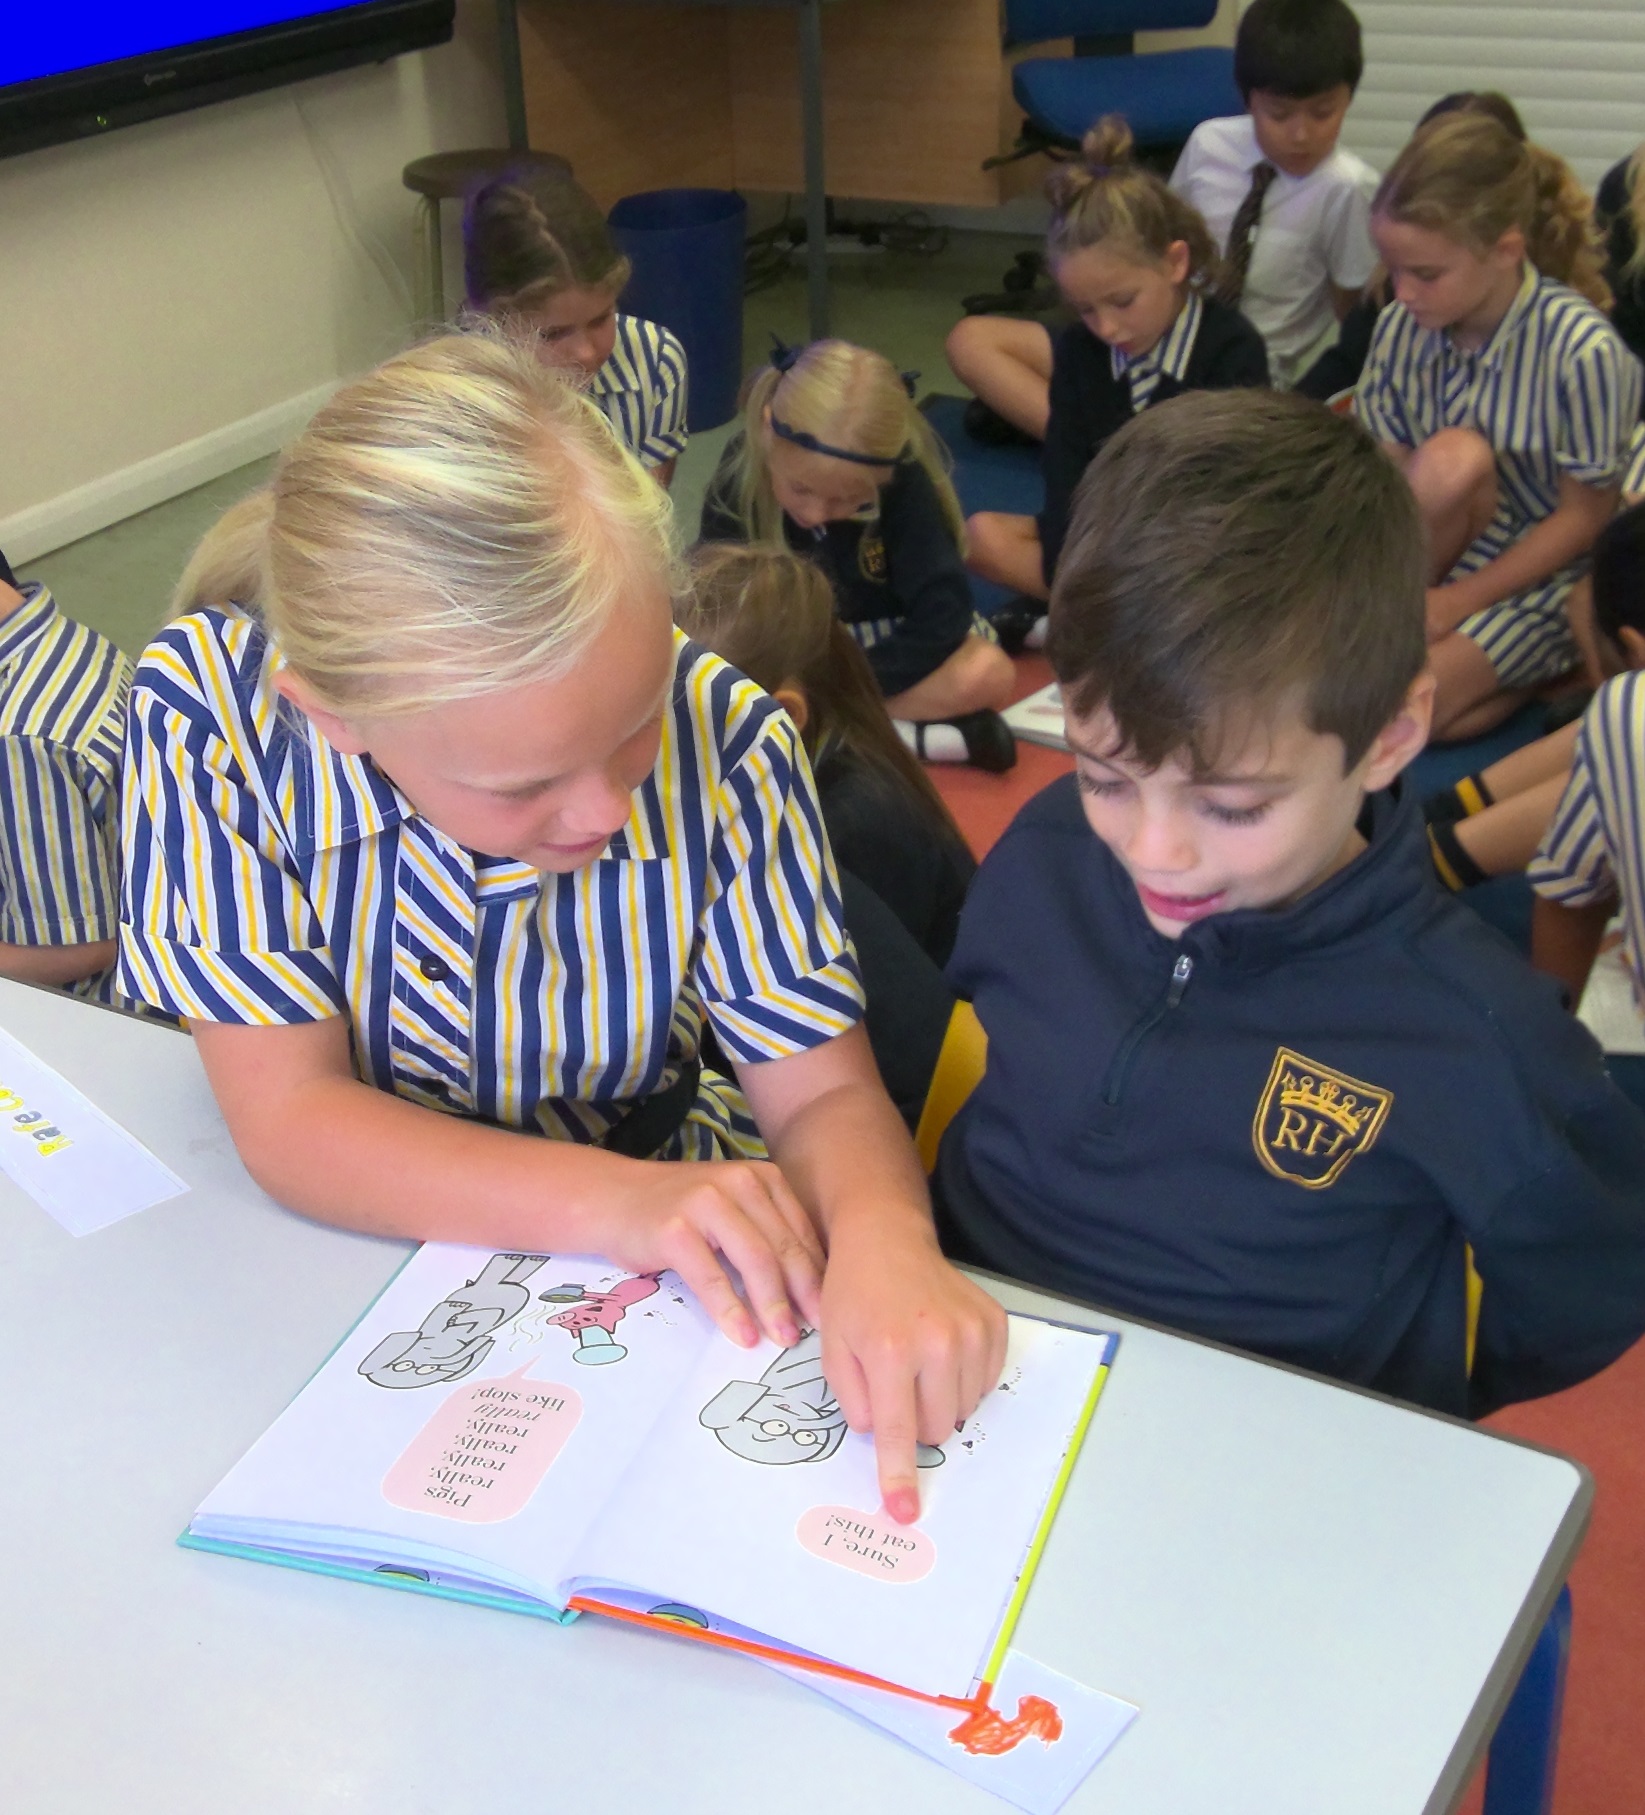 Year 5 Pupil reading to a Year 2 Pupil